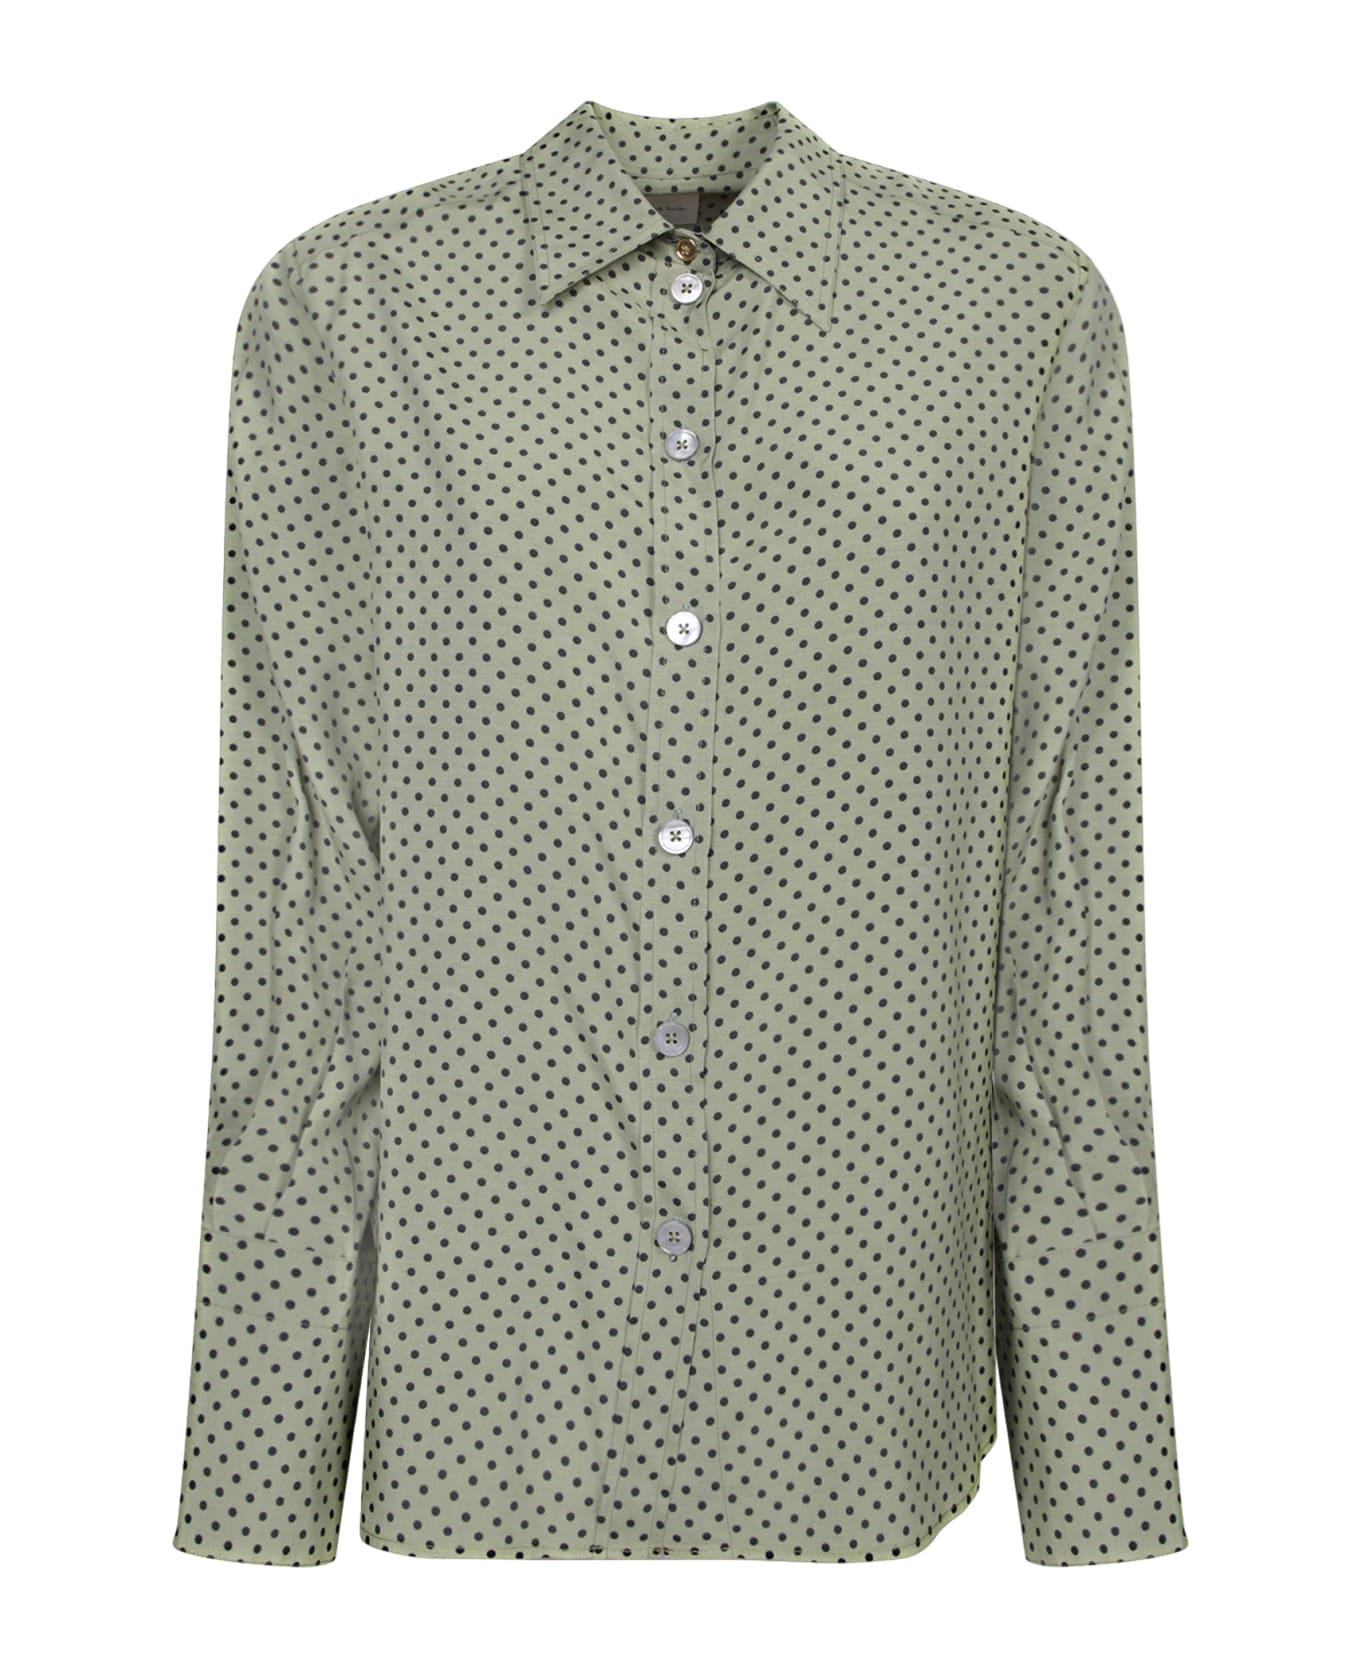 Paul Smith Patterned Green Shirt - Green シャツ